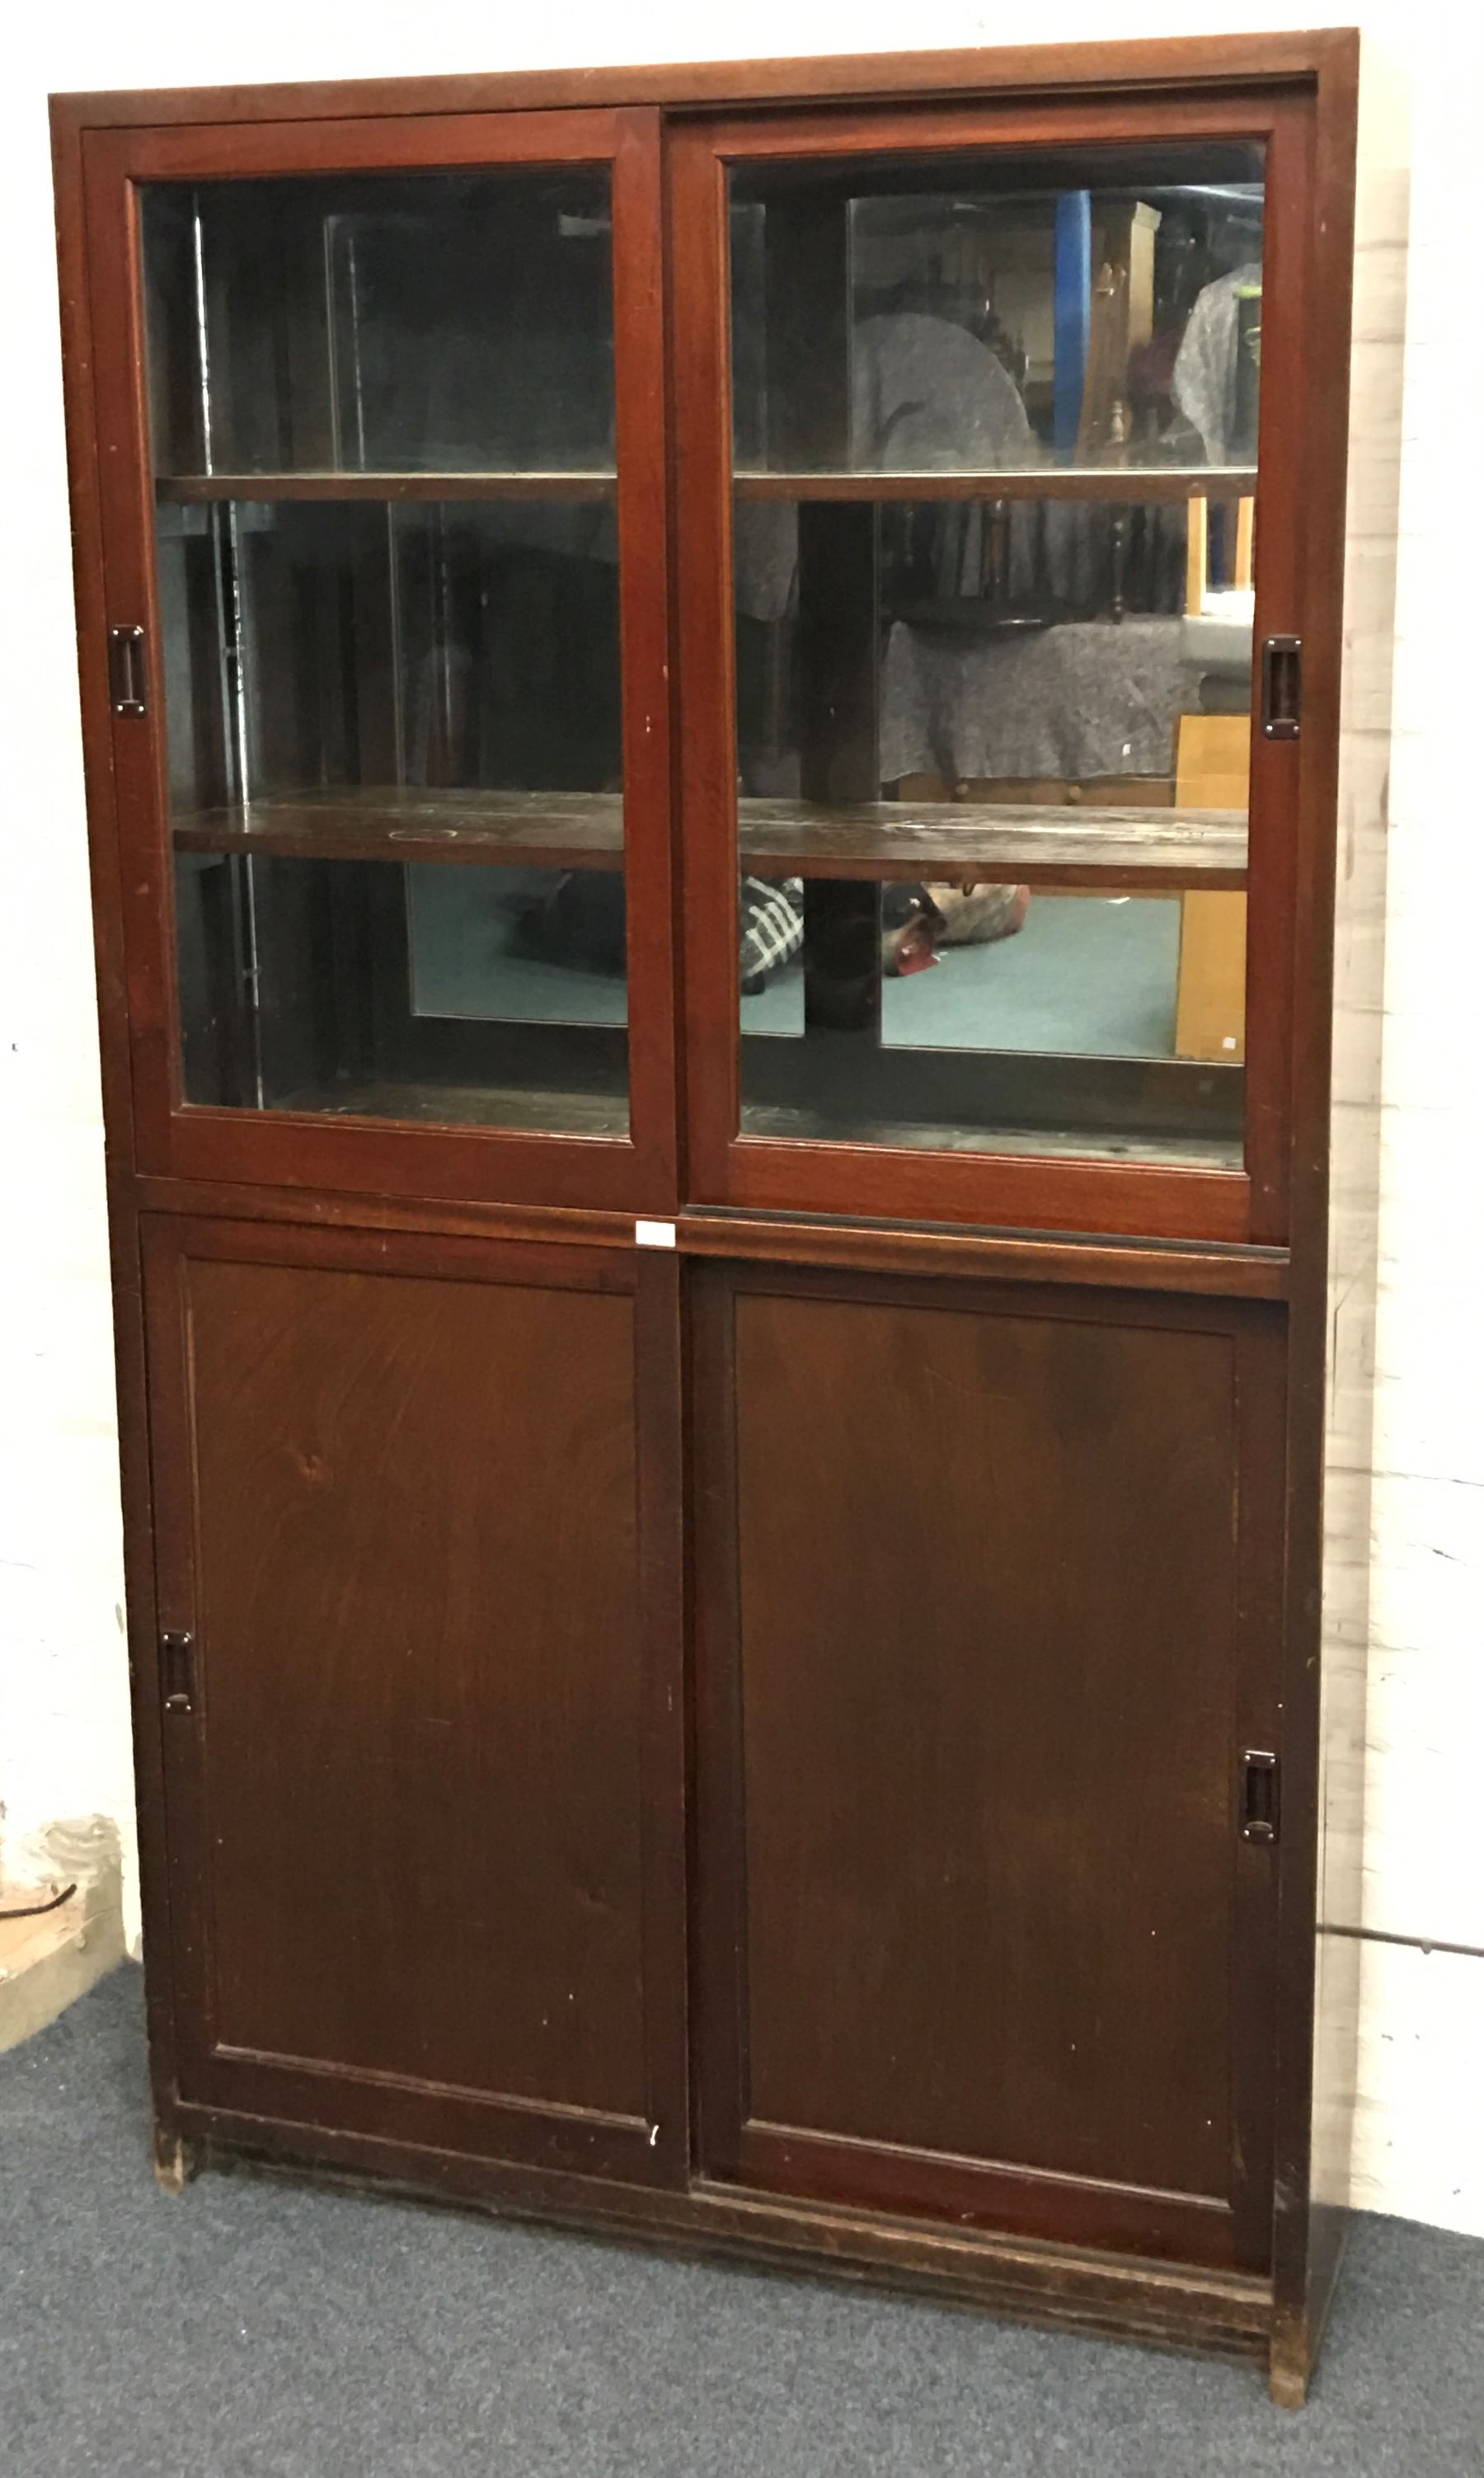 20th century pine mirror back display cabinet with sliding glass doors revealing two shelves - Image 2 of 5